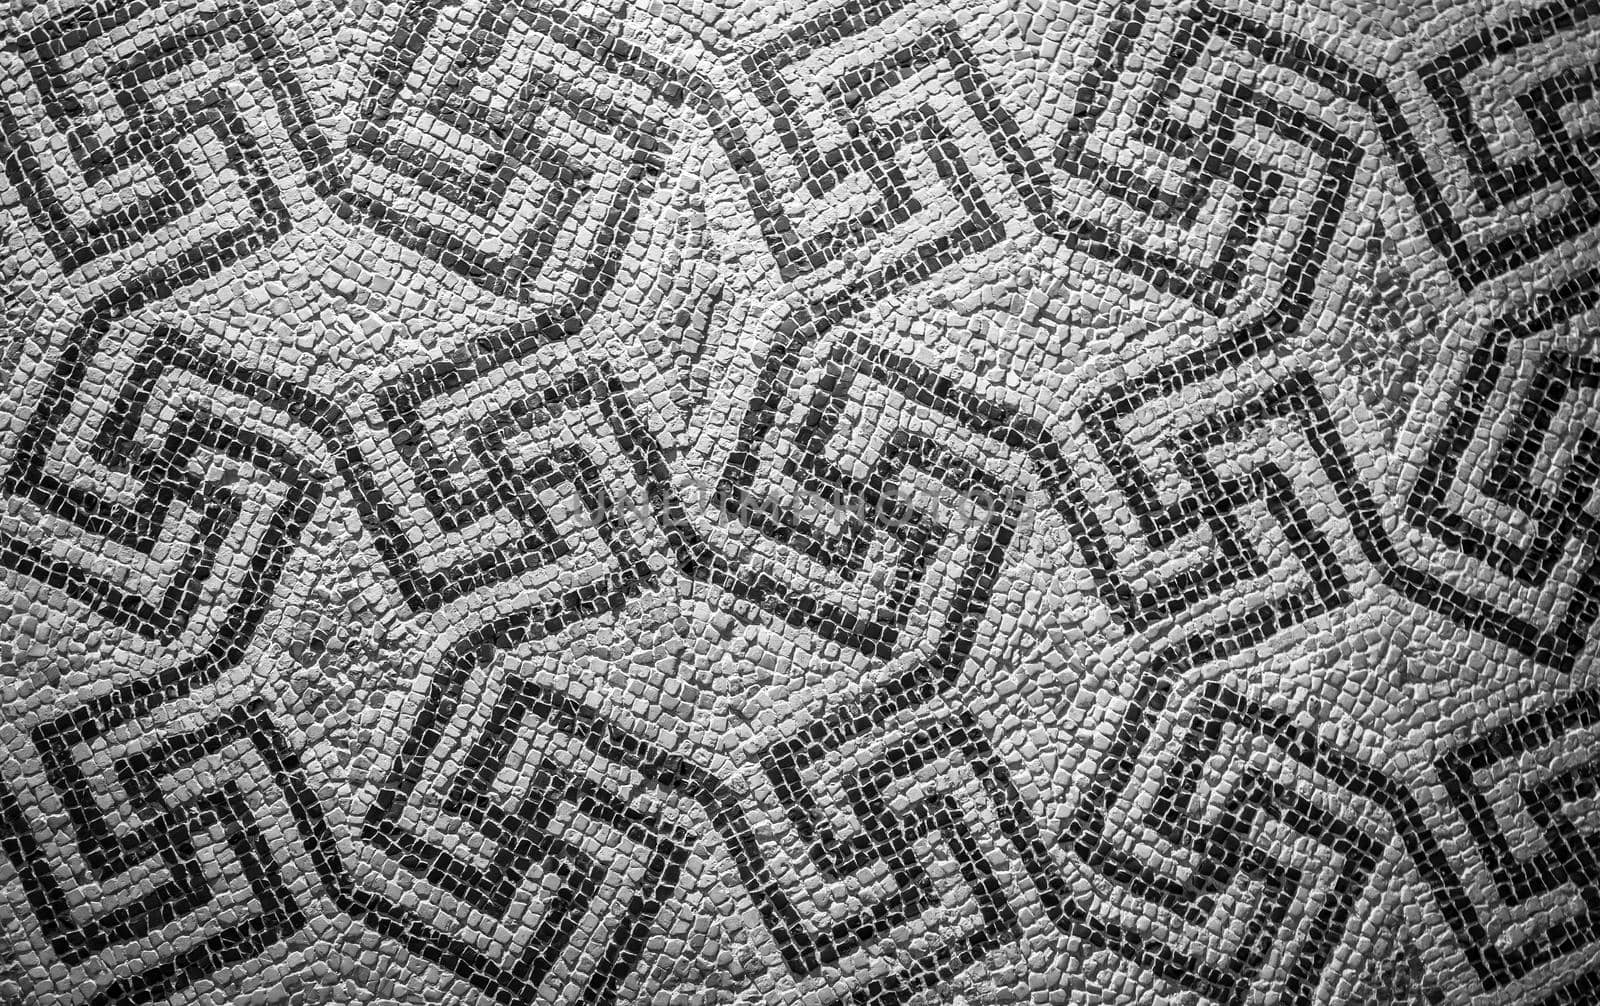 Swastika symbol in ancient Celtic mosaic decoration. Design for an old style background. by Perseomedusa